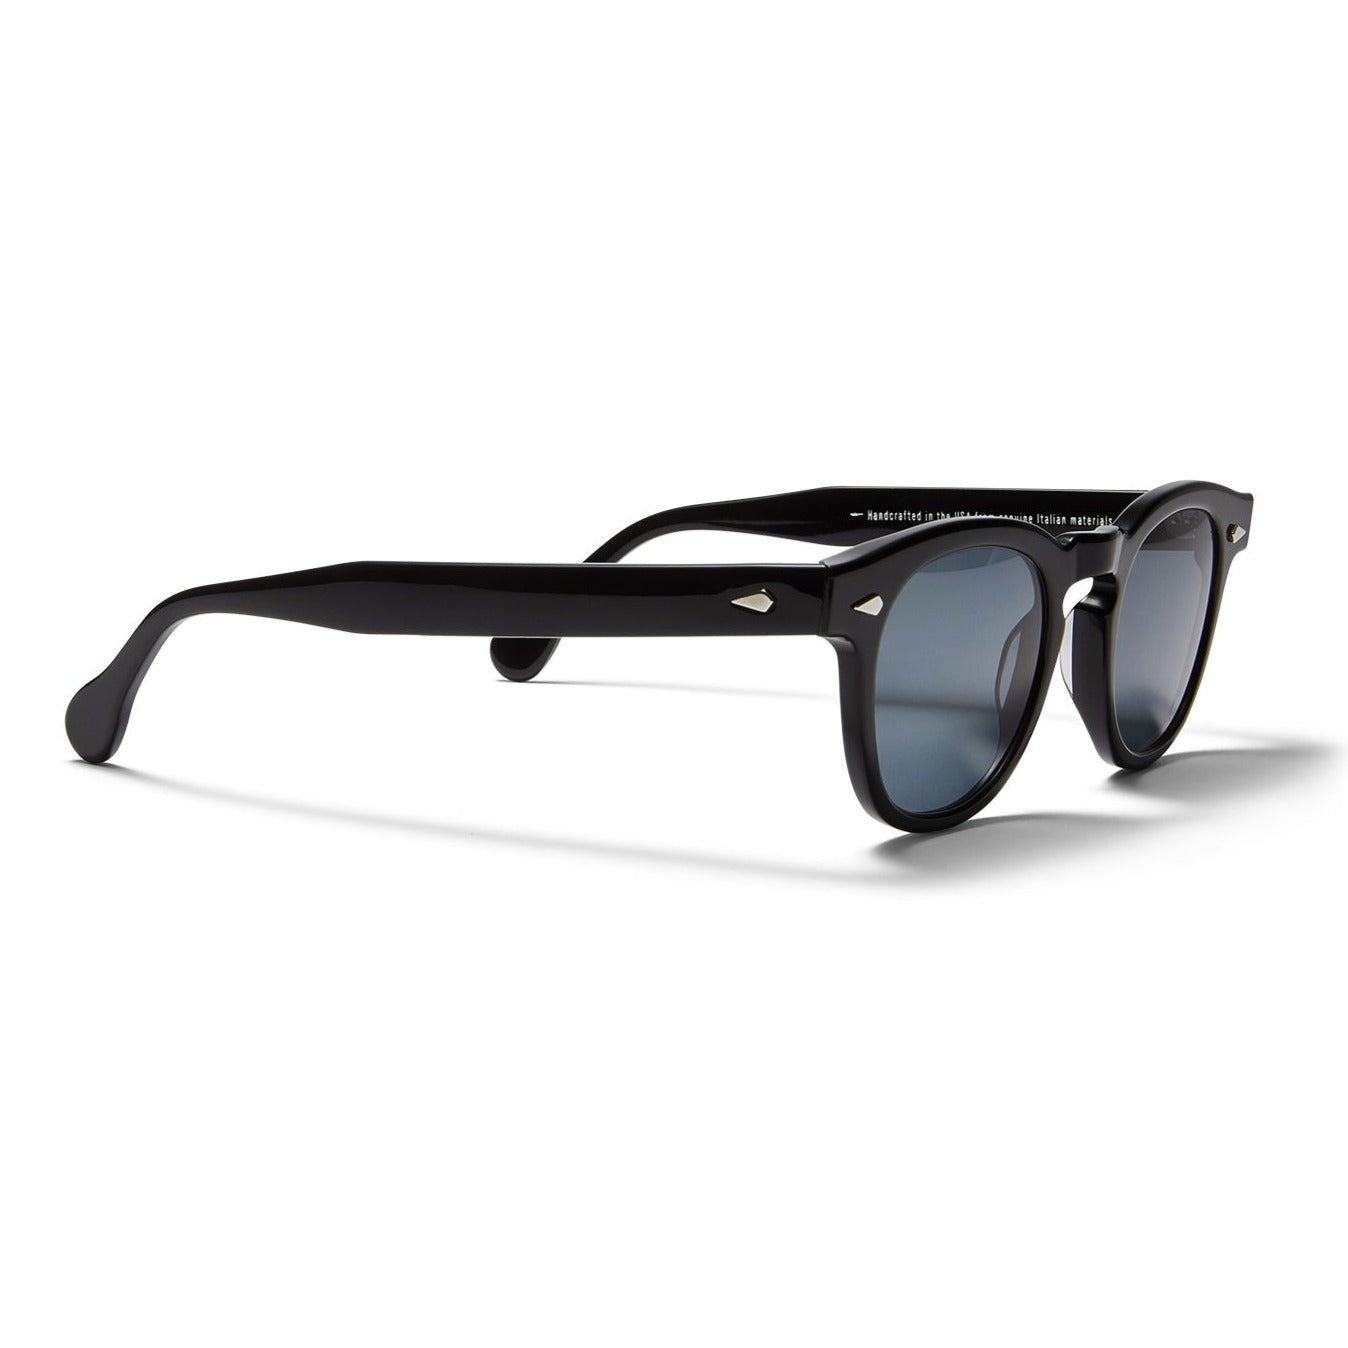 A side view of the glossy black Arnel USA Sunglass frame—the Vintage eyewear. 